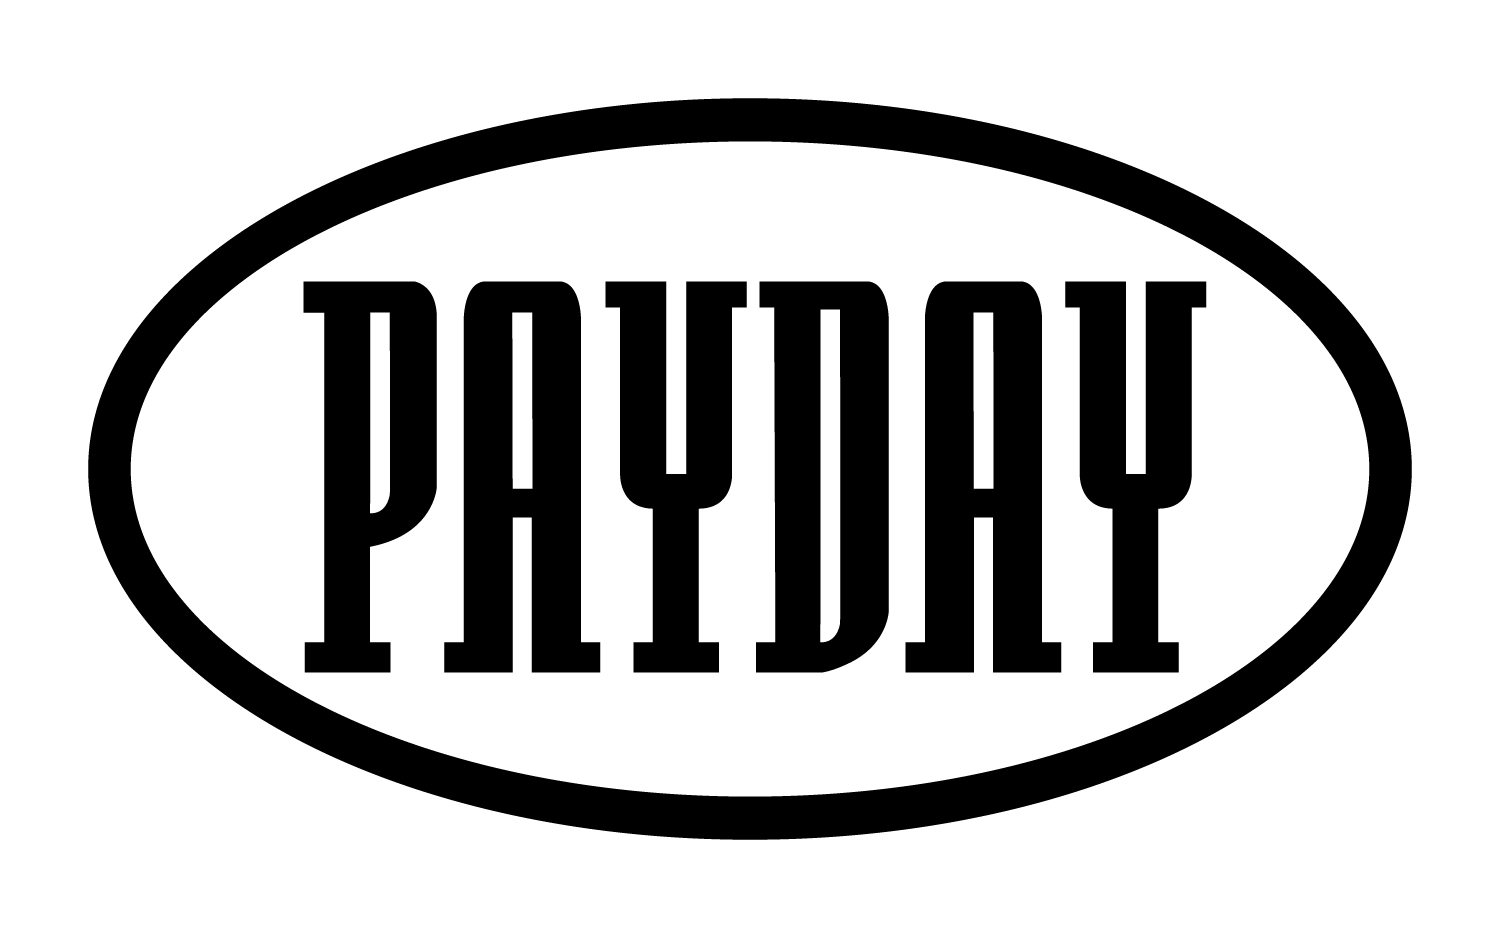 payday clipart